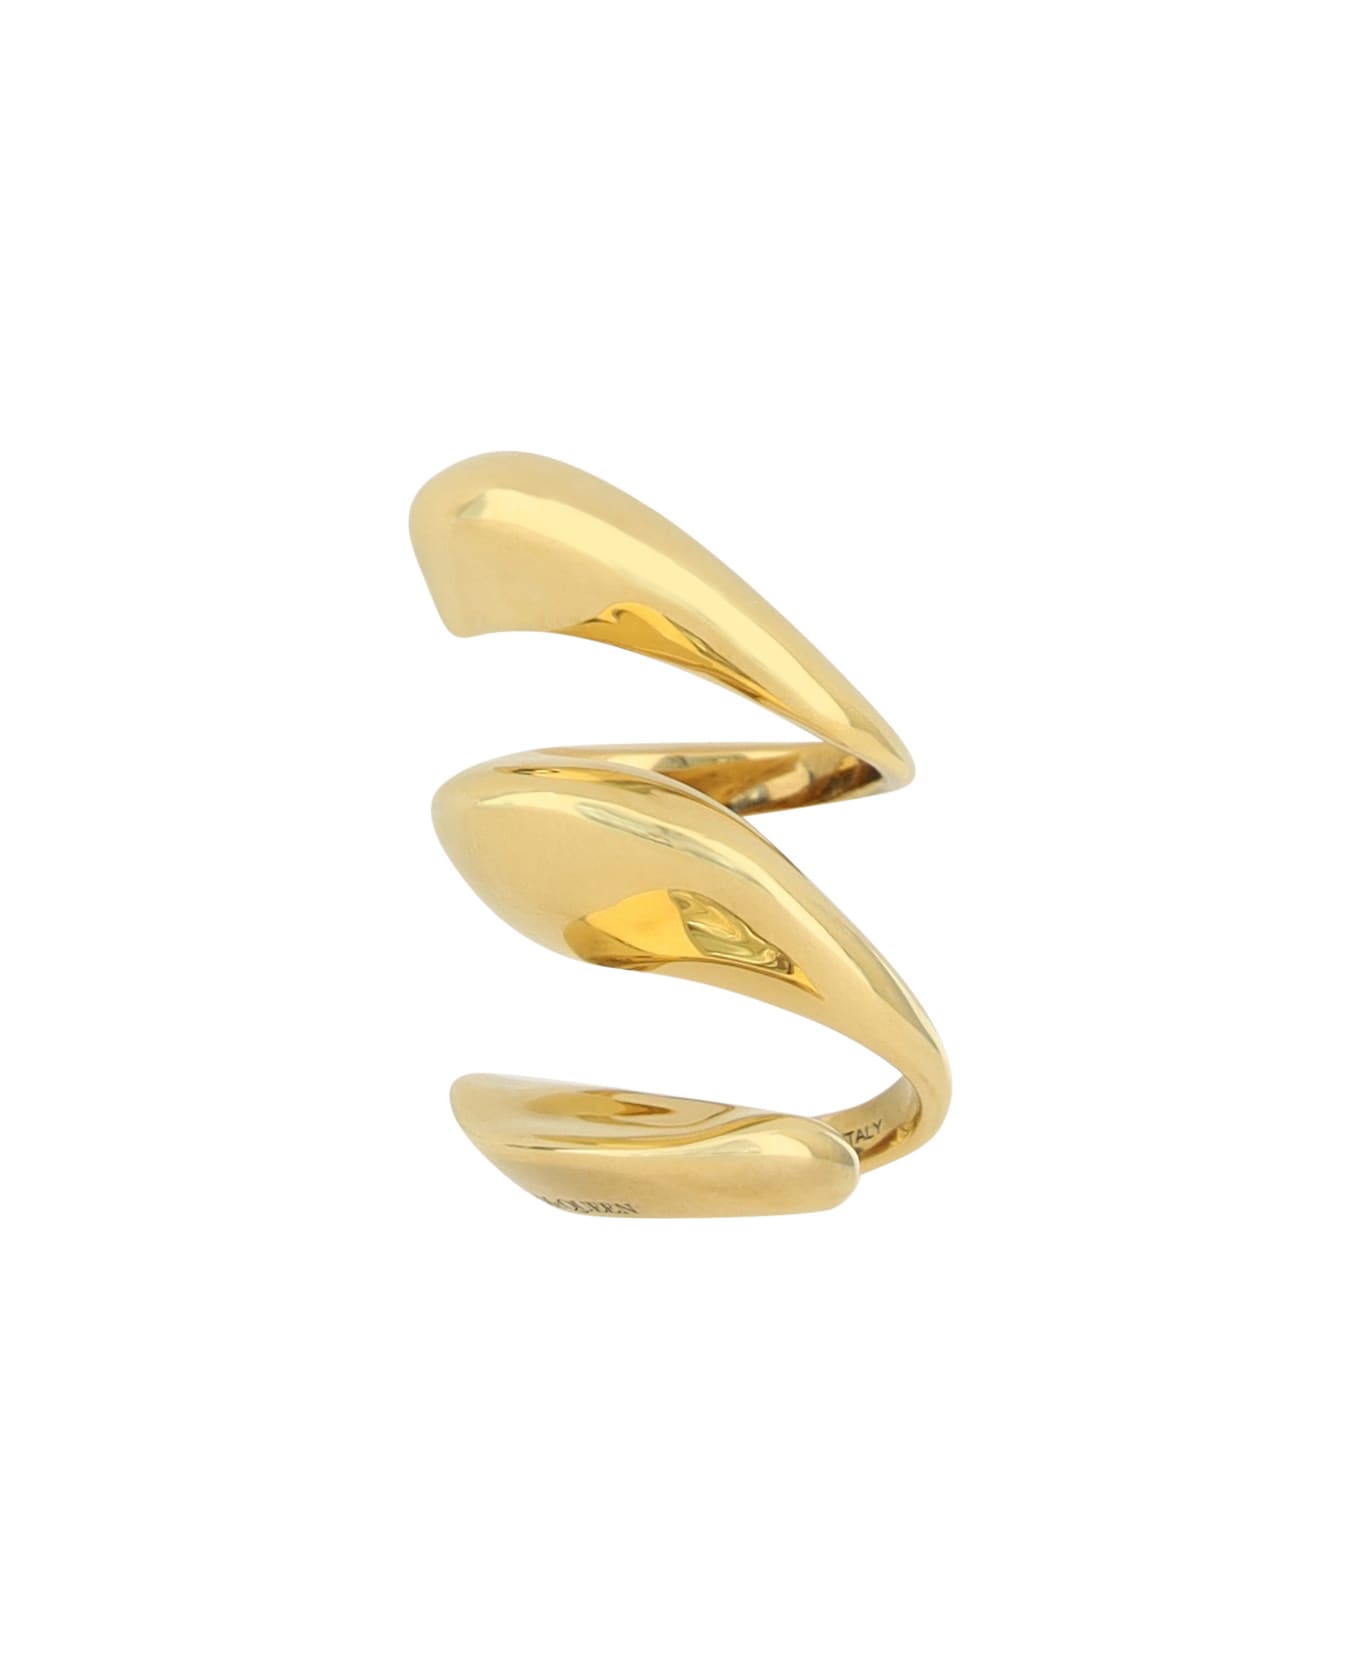 Alexander McQueen Twisted Ring - Multi